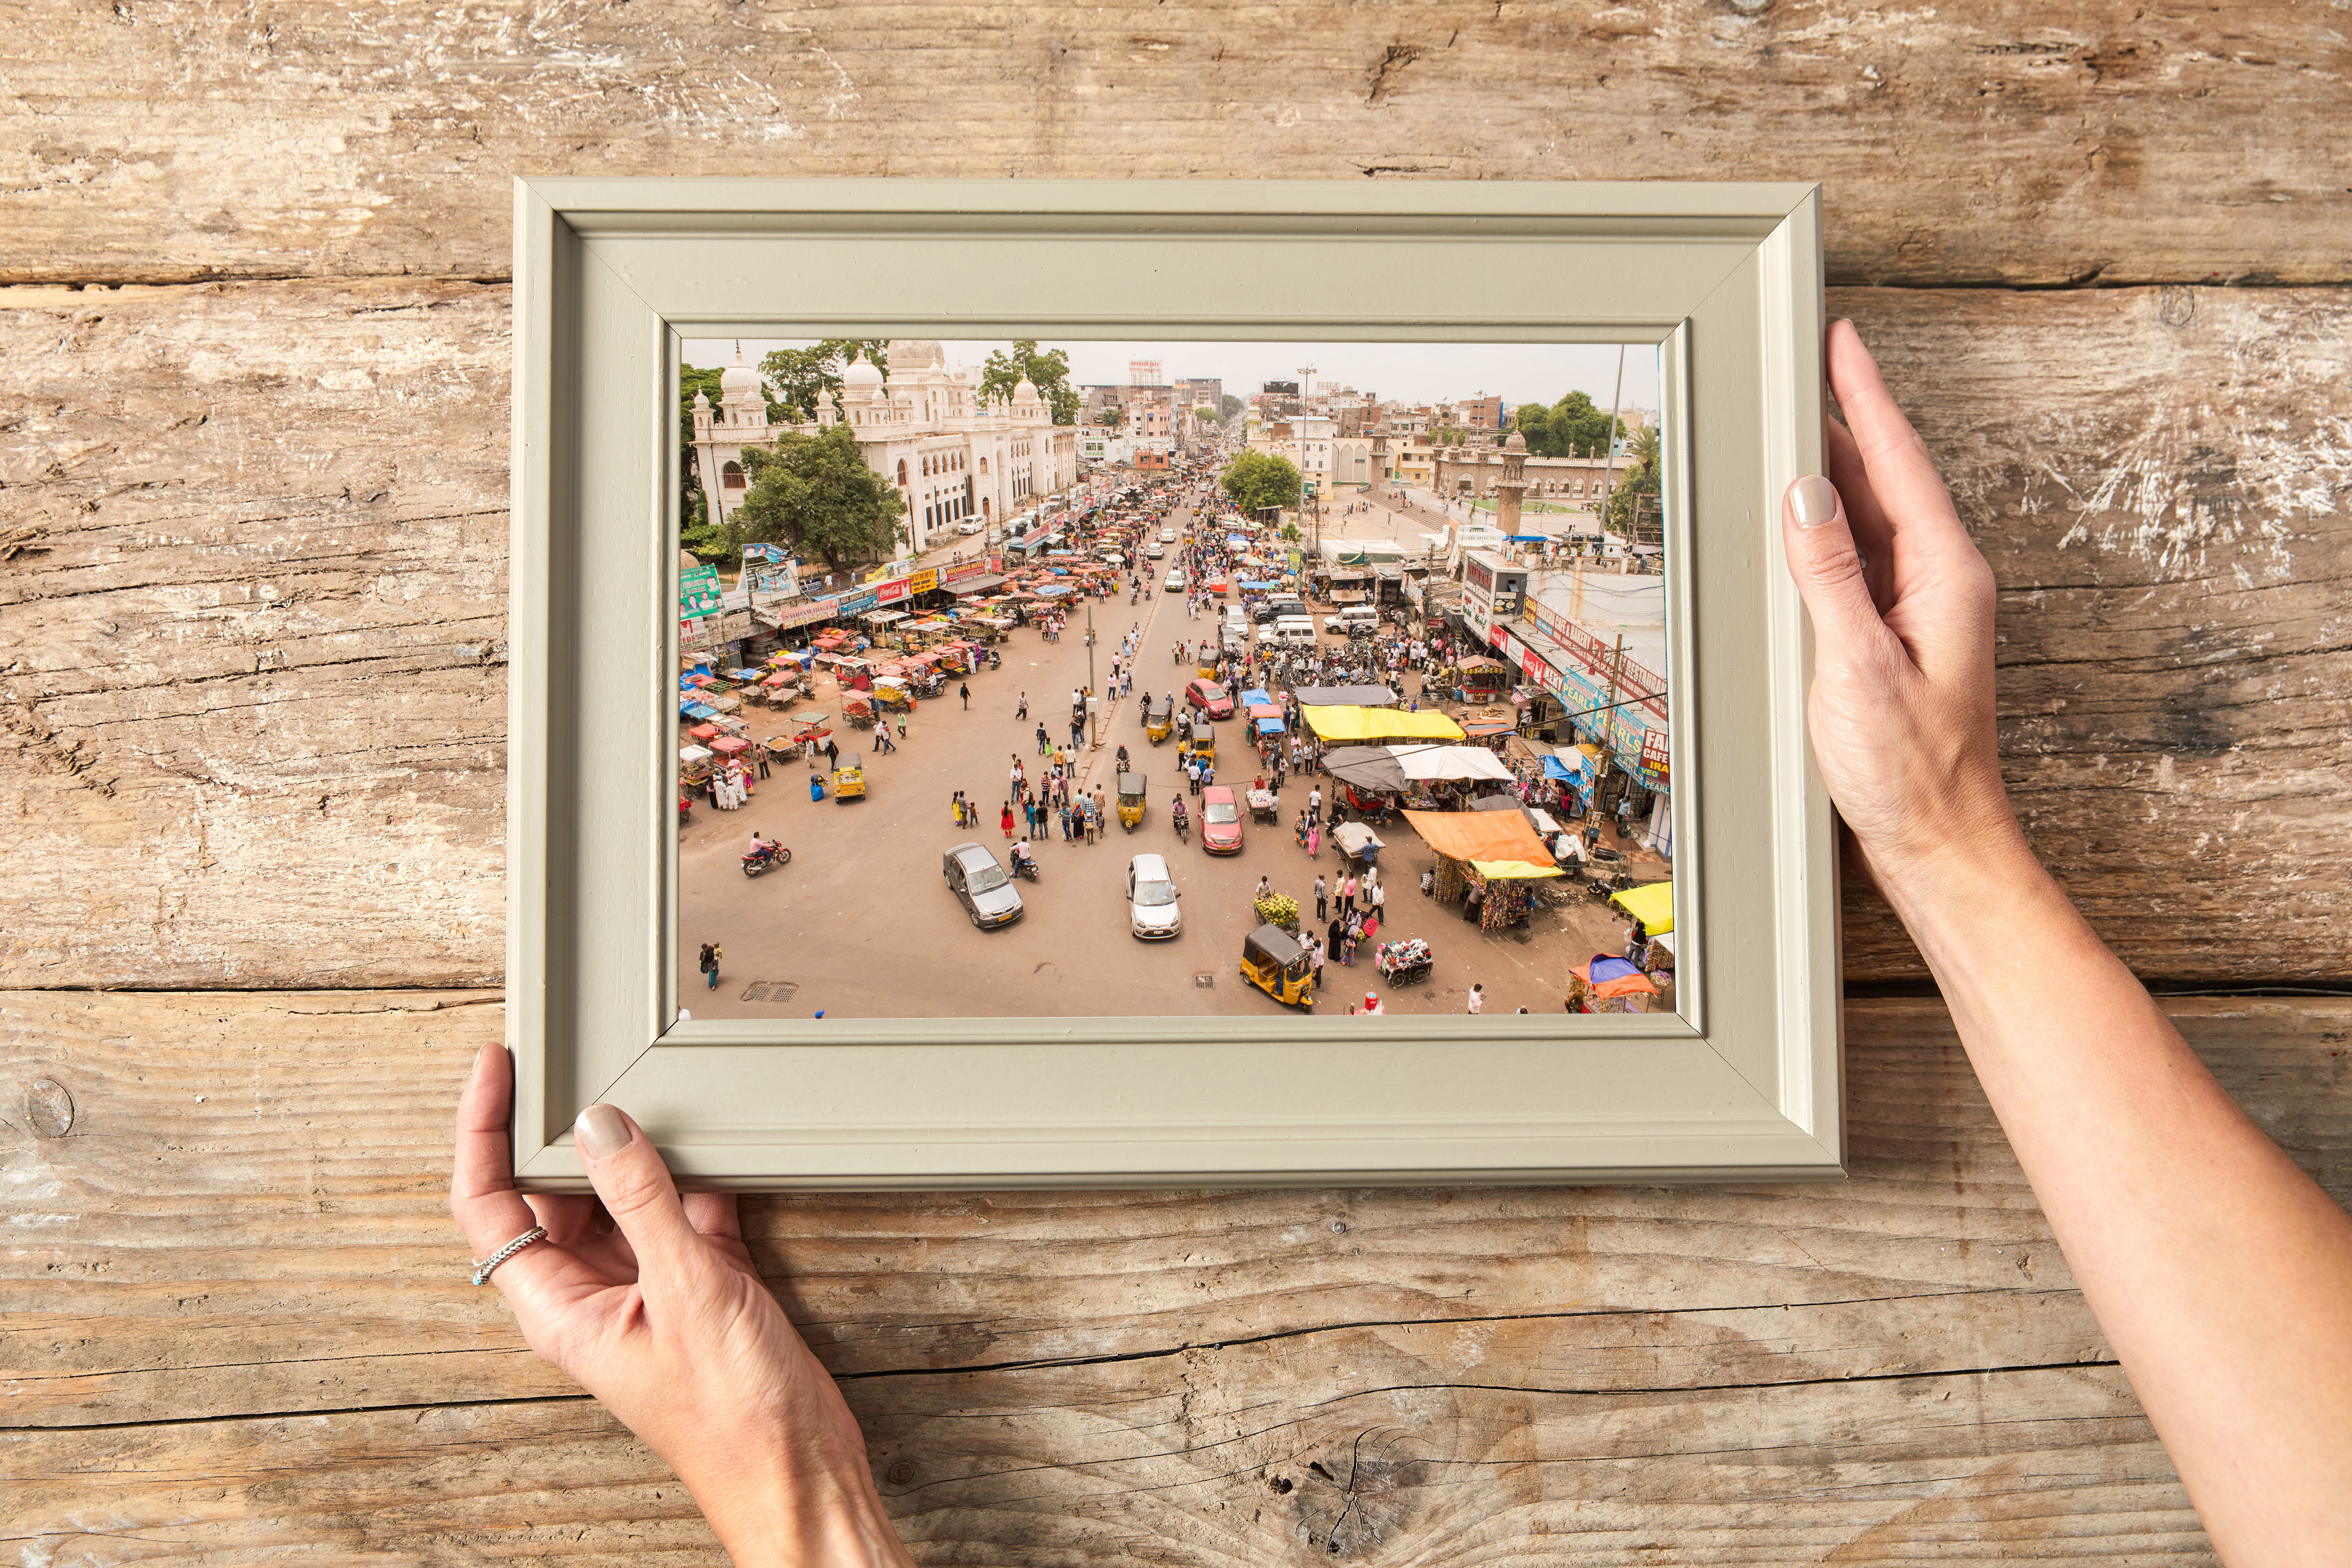 FPersonalised framed photo print of streets in India with free next day delivery UK